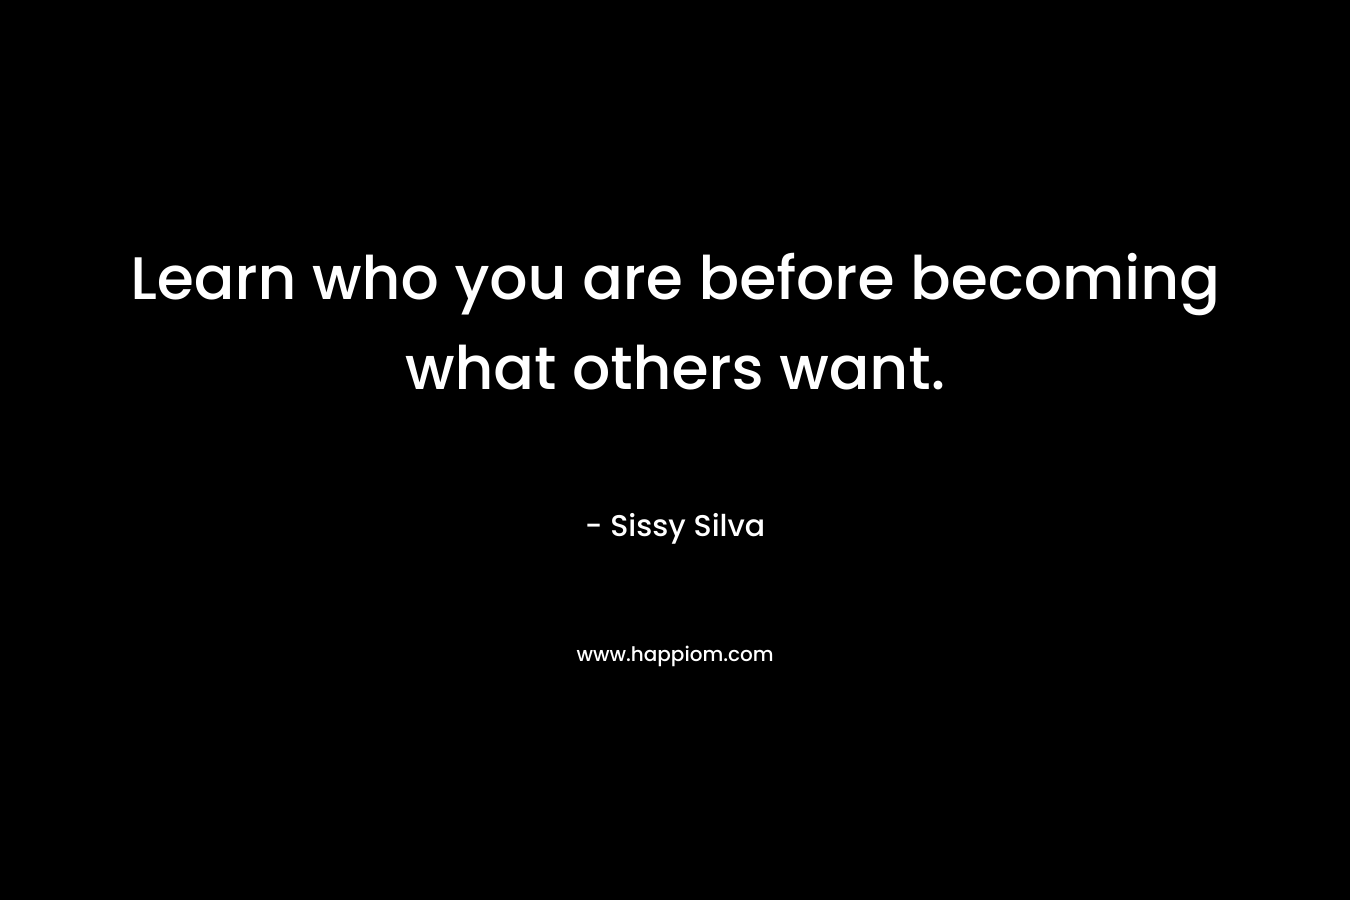 Learn who you are before becoming what others want. – Sissy Silva